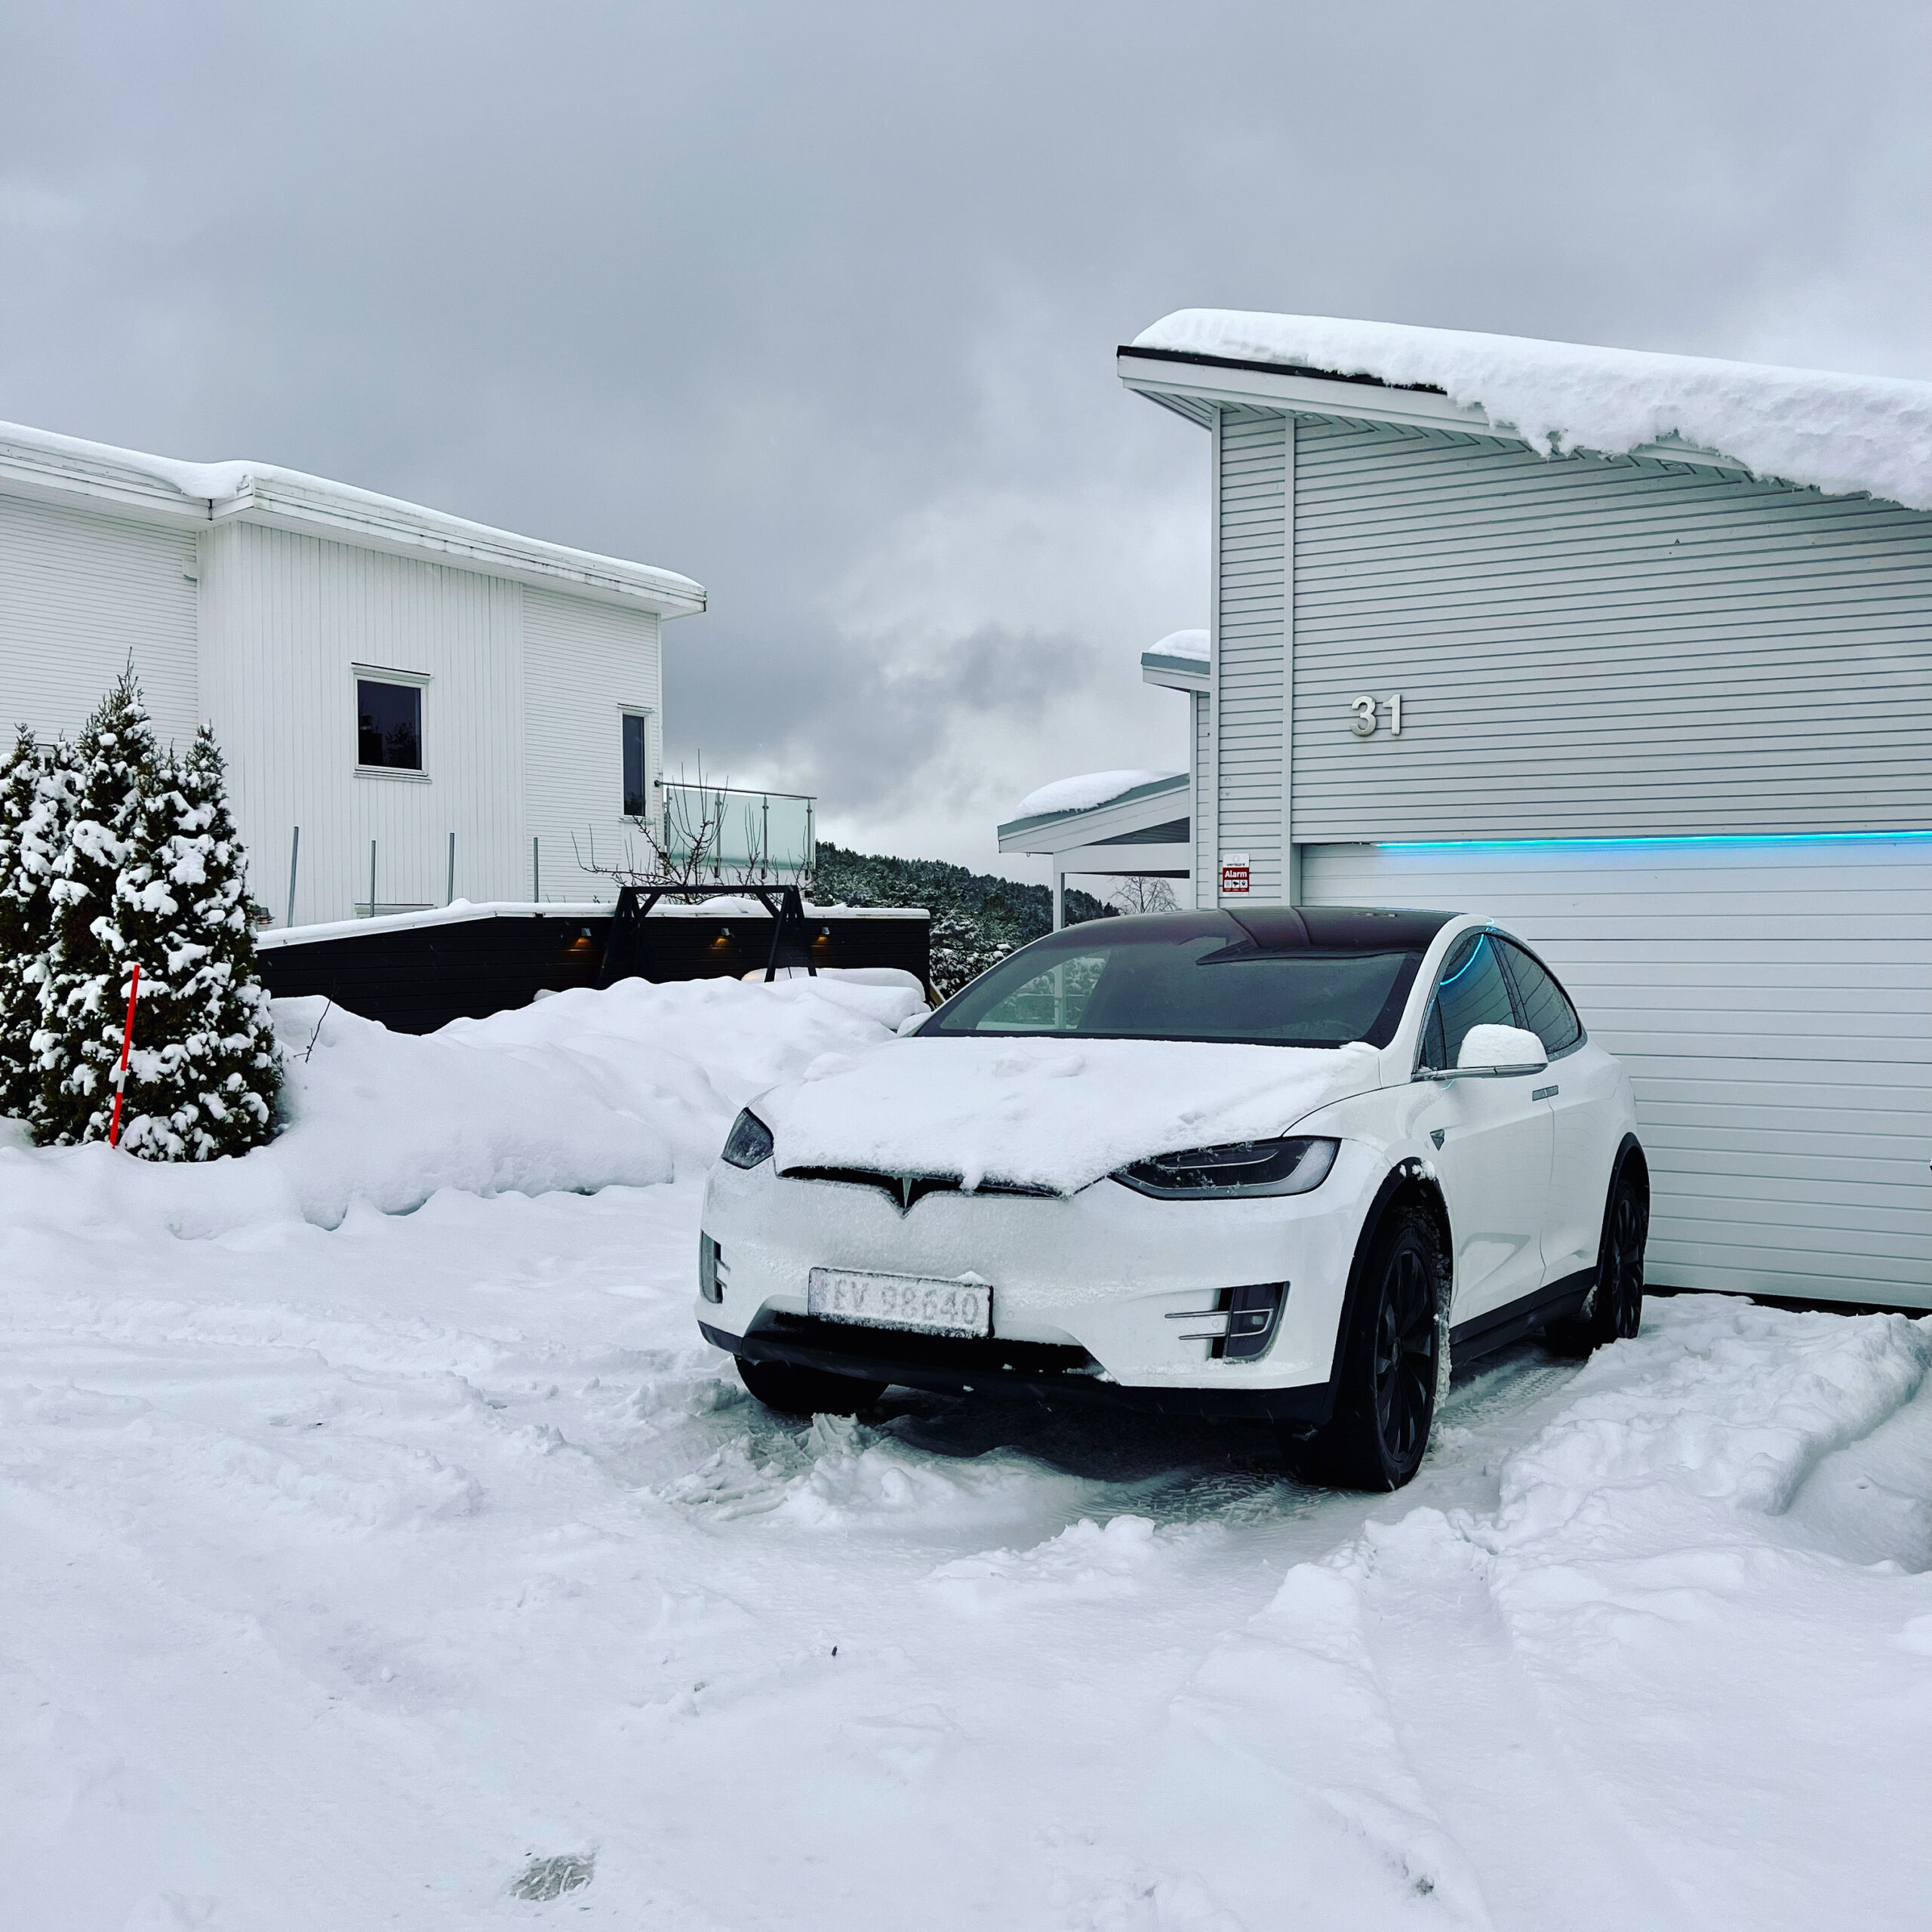 A white Tesla Model X in rought winter conditions with snow